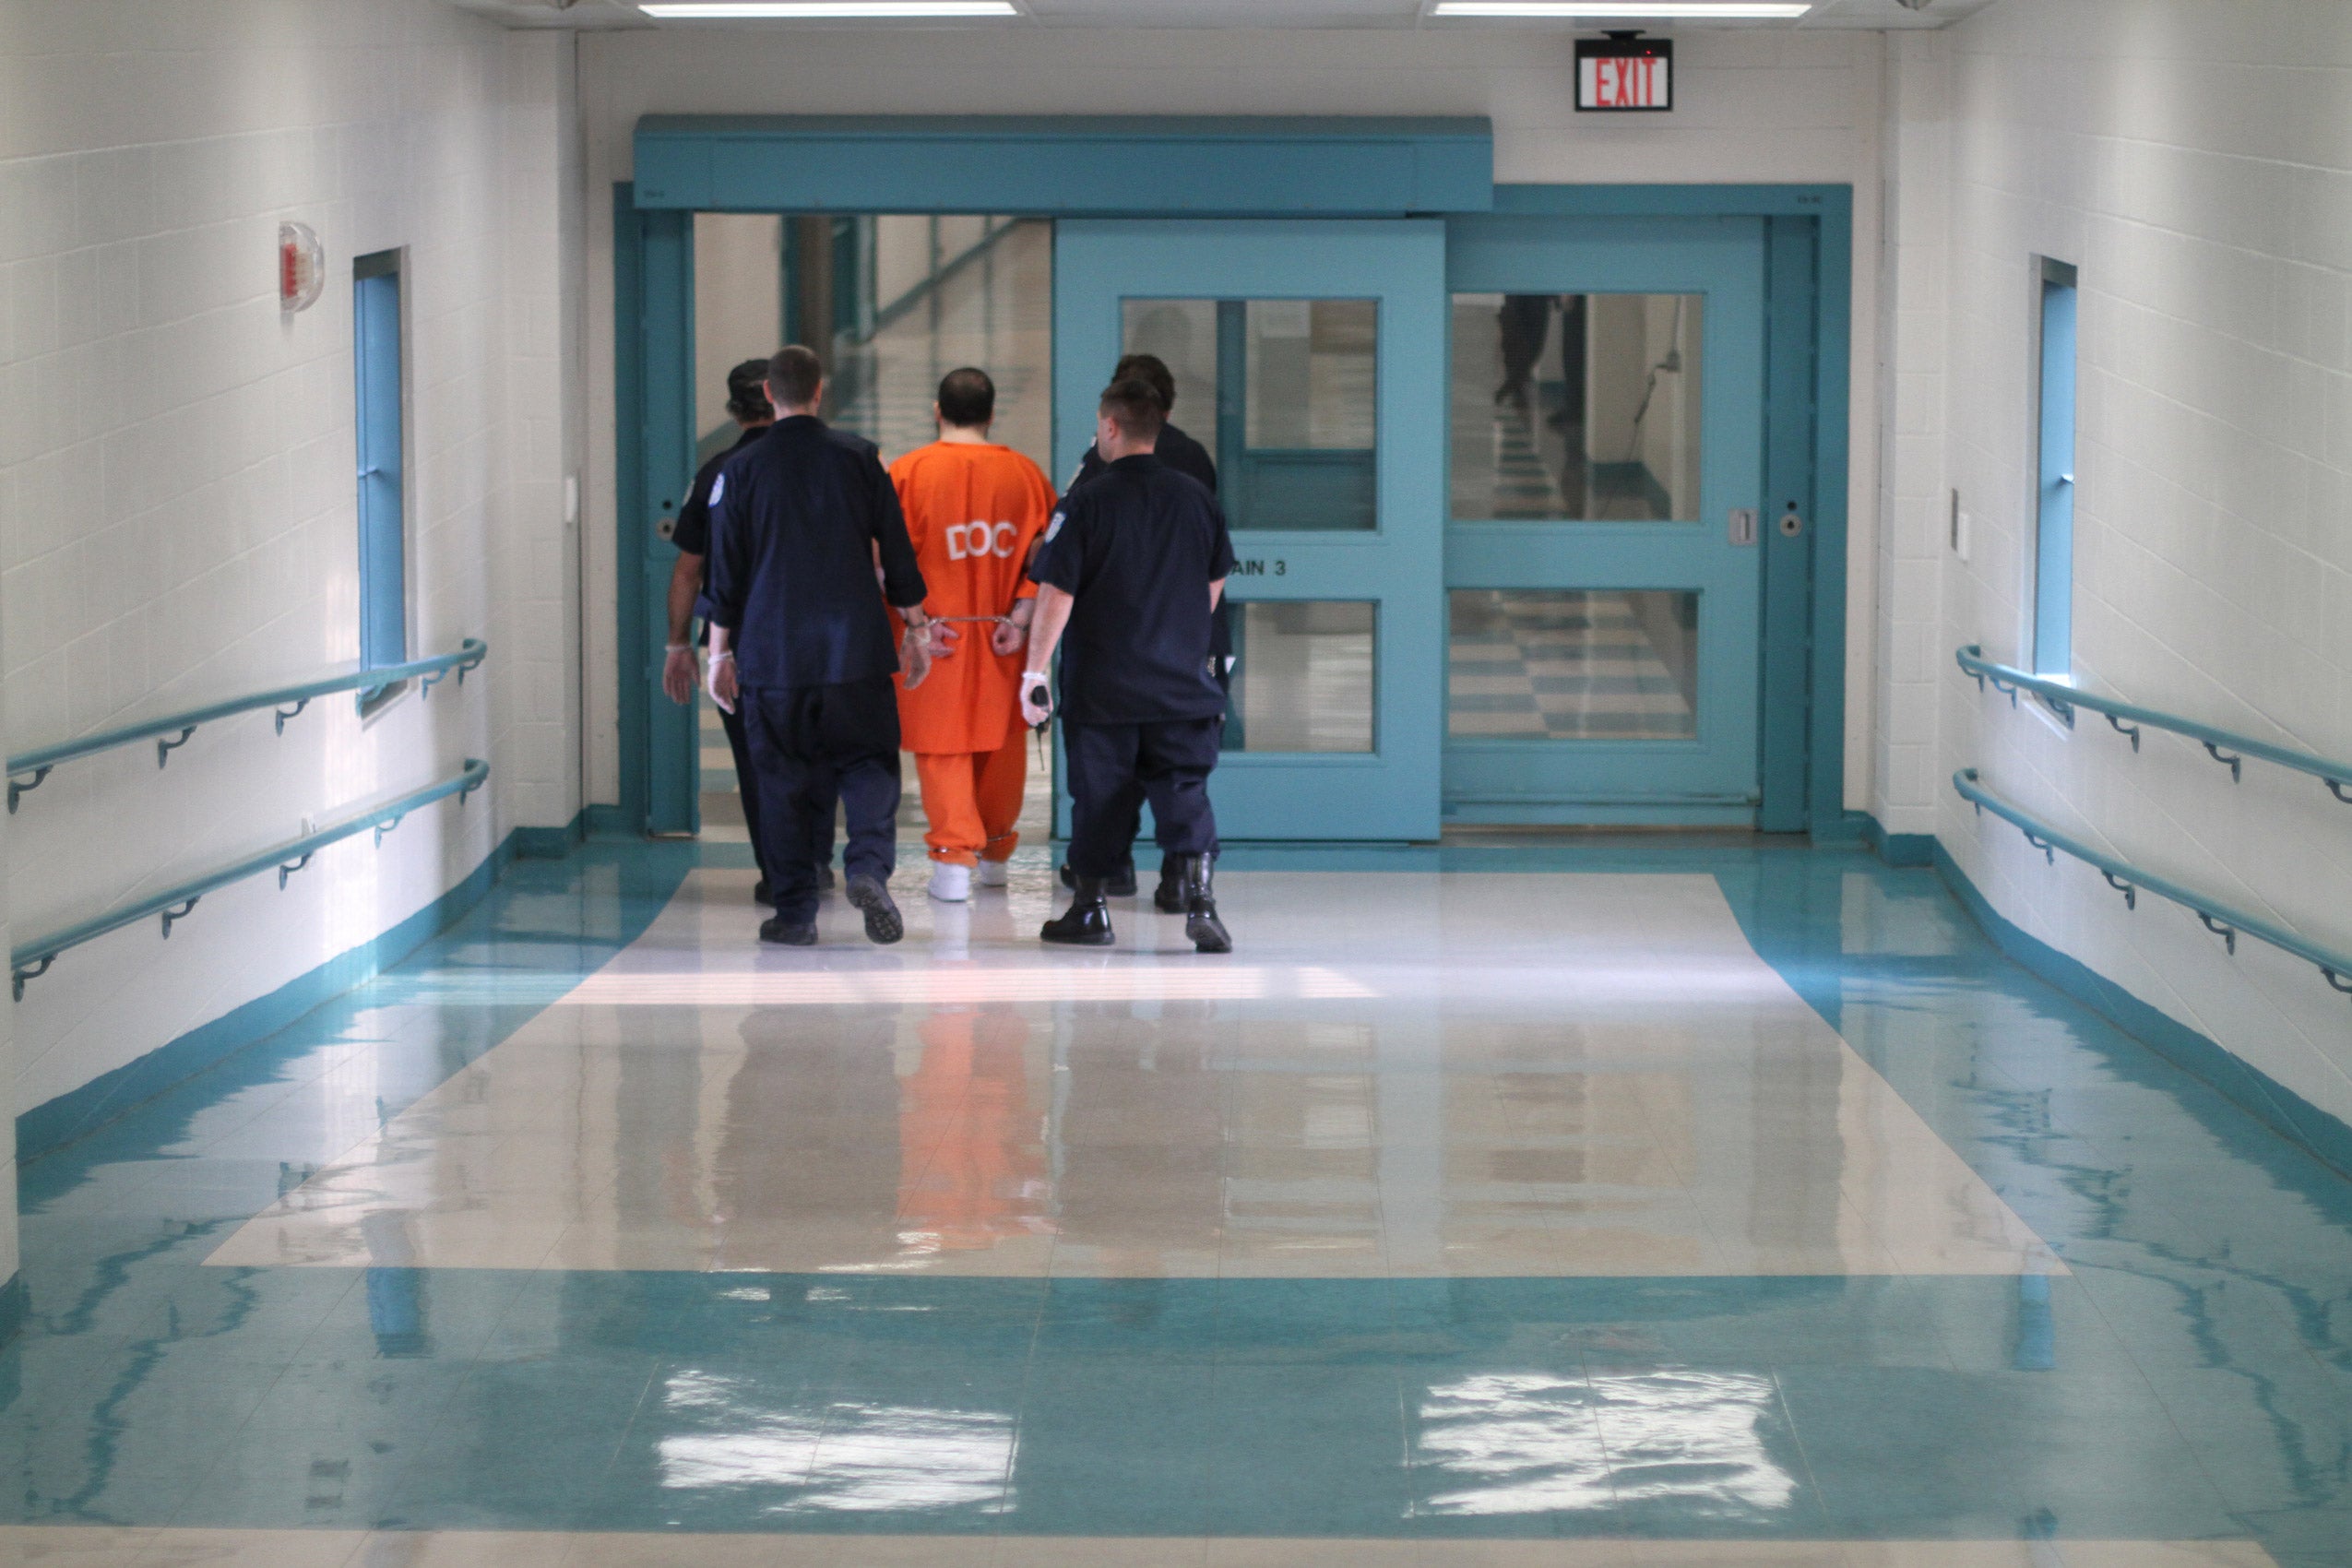 Man in orange jumpsuit wearing handcuffs is flanked by four police officers as they walk down a hallway.